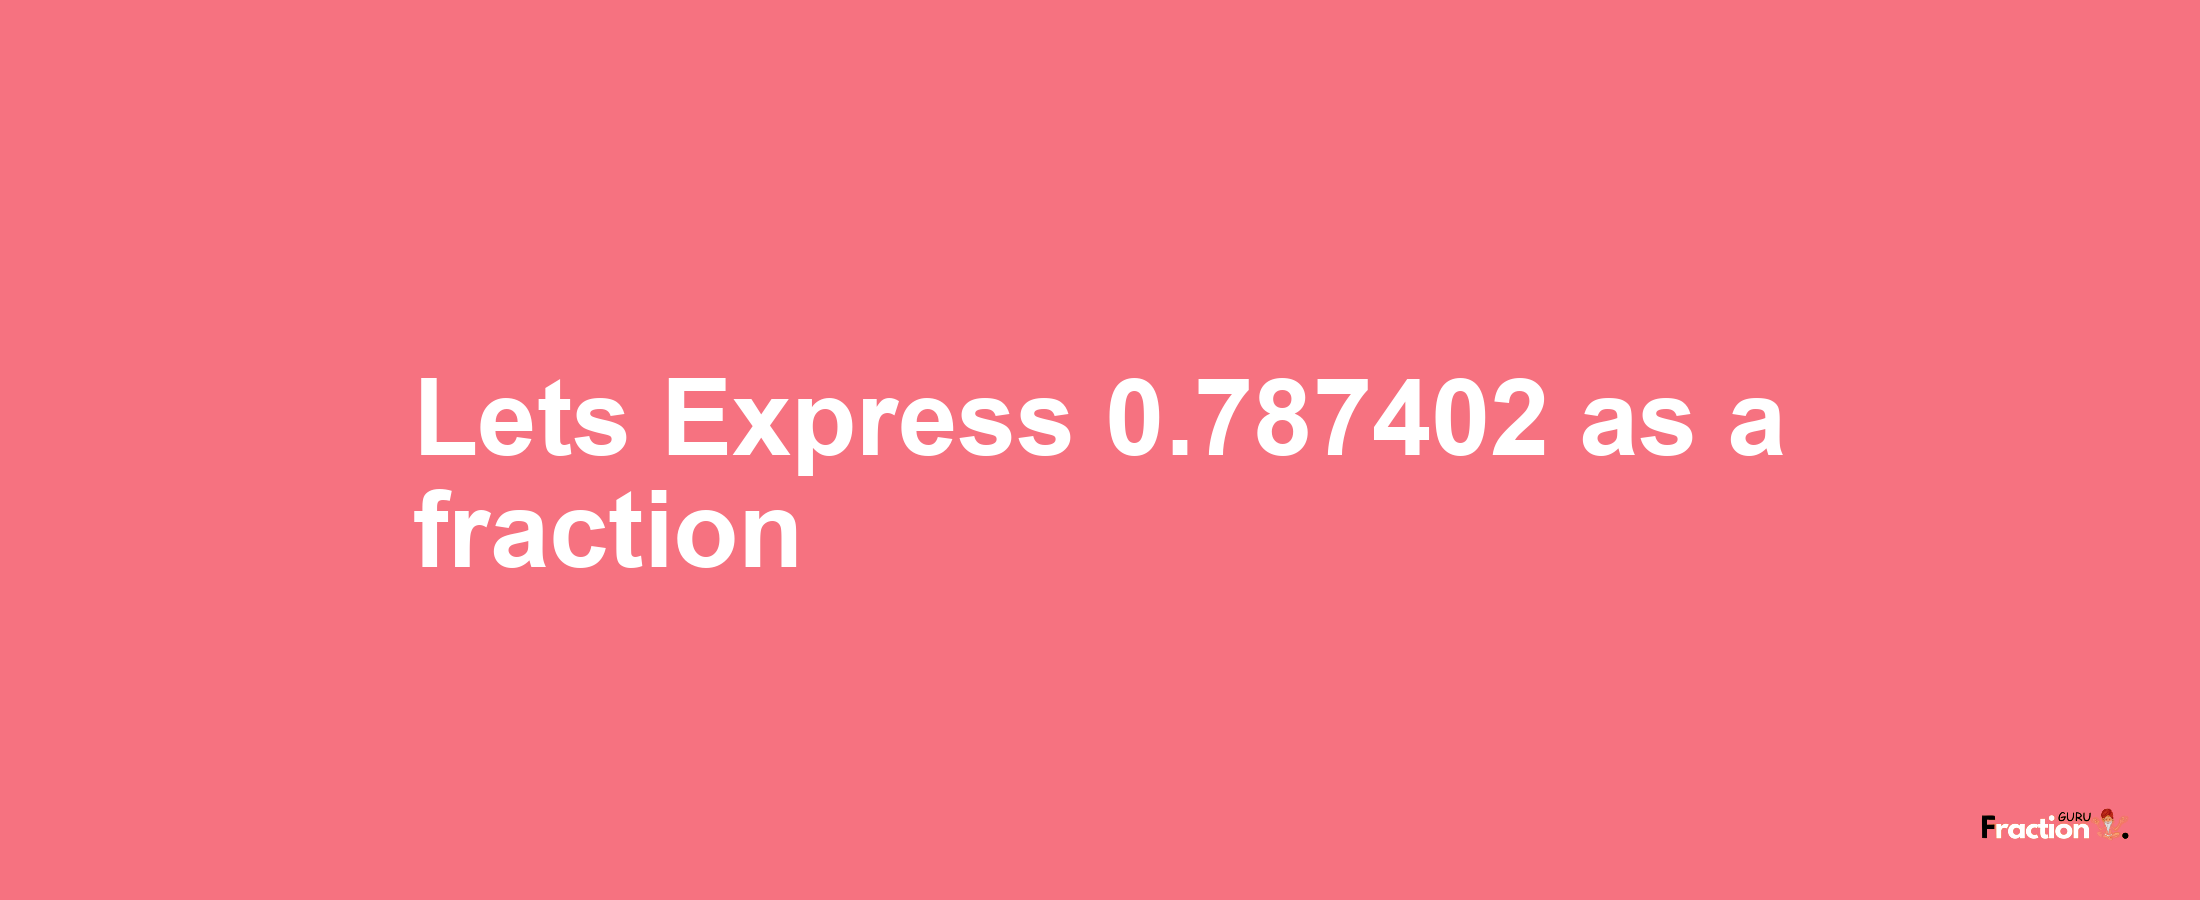 Lets Express 0.787402 as afraction